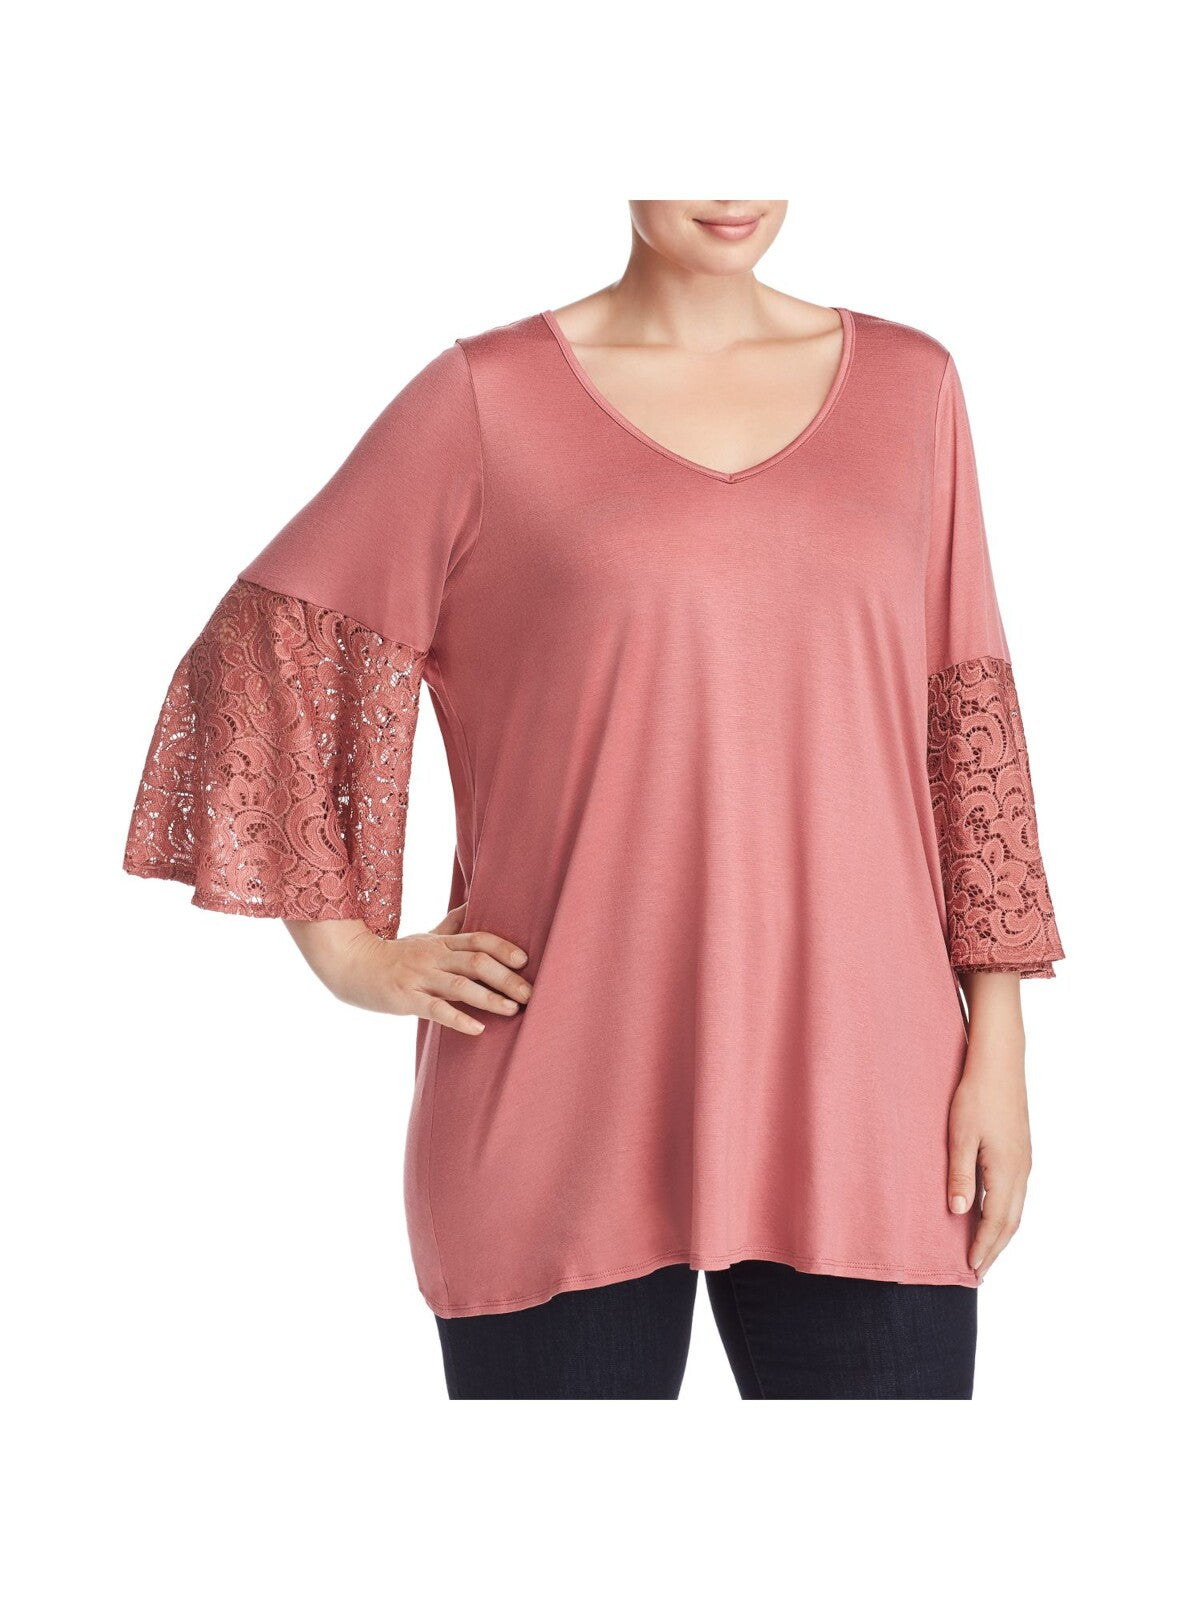 STATUS BY CHENAULT Womens Pink Stretch Lace Bell Sleeve V Neck Top Plus 1X